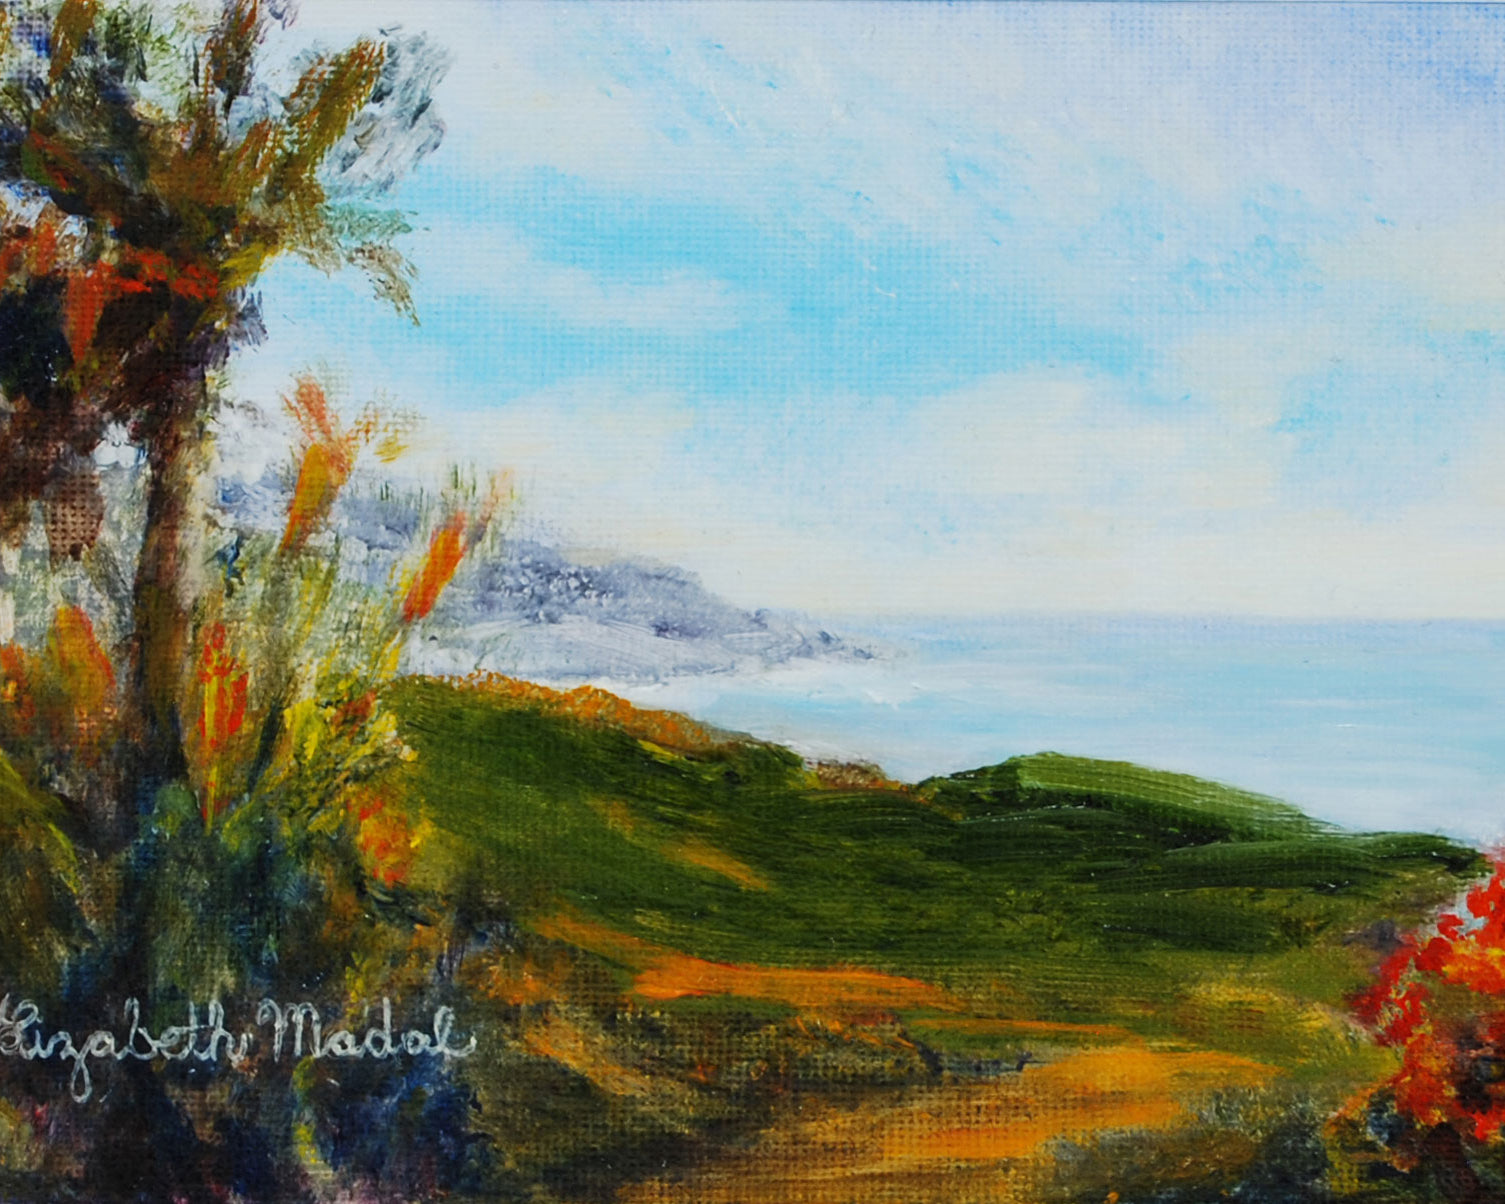 An oil painting of palms on the California coast.